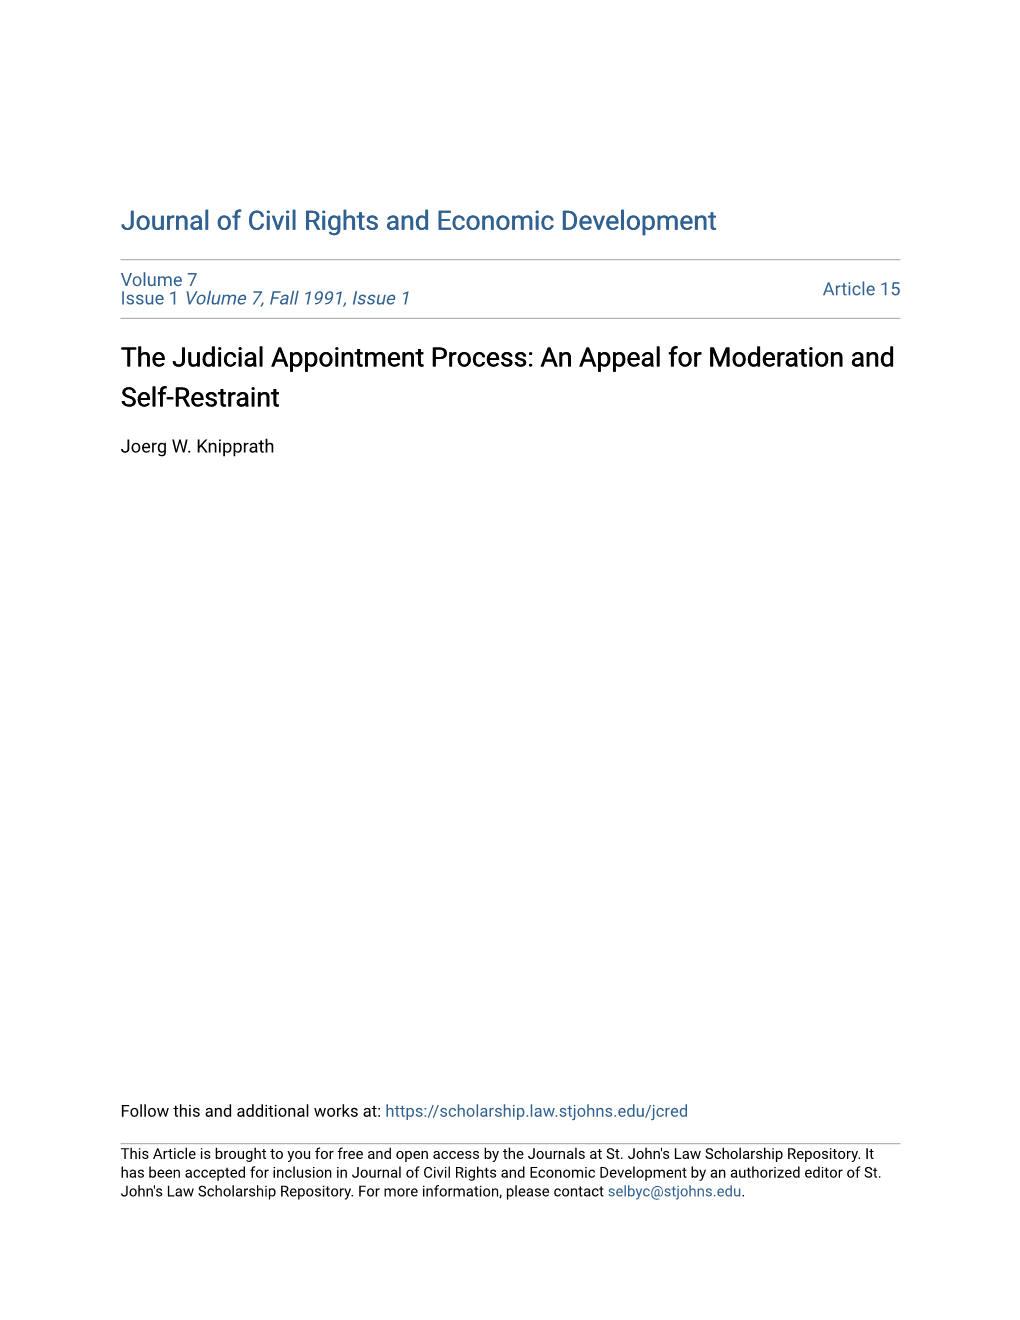 The Judicial Appointment Process: an Appeal for Moderation and Self-Restraint